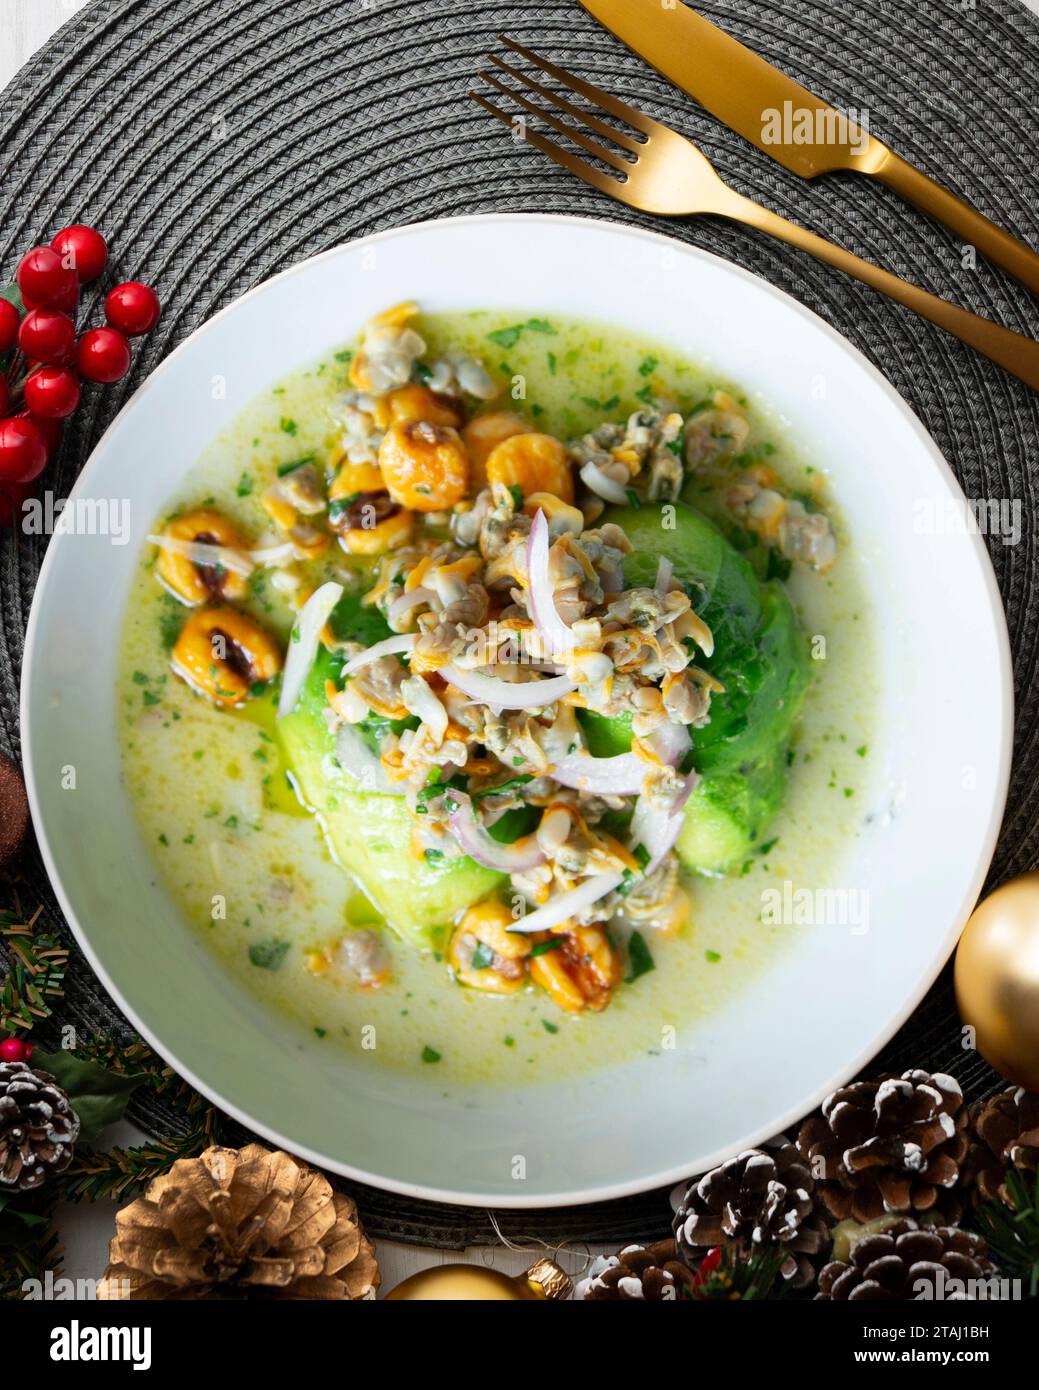 Ceviche with cockles and avocado. Christmas food served on a table decorated with Christmas motifs. Stock Photo